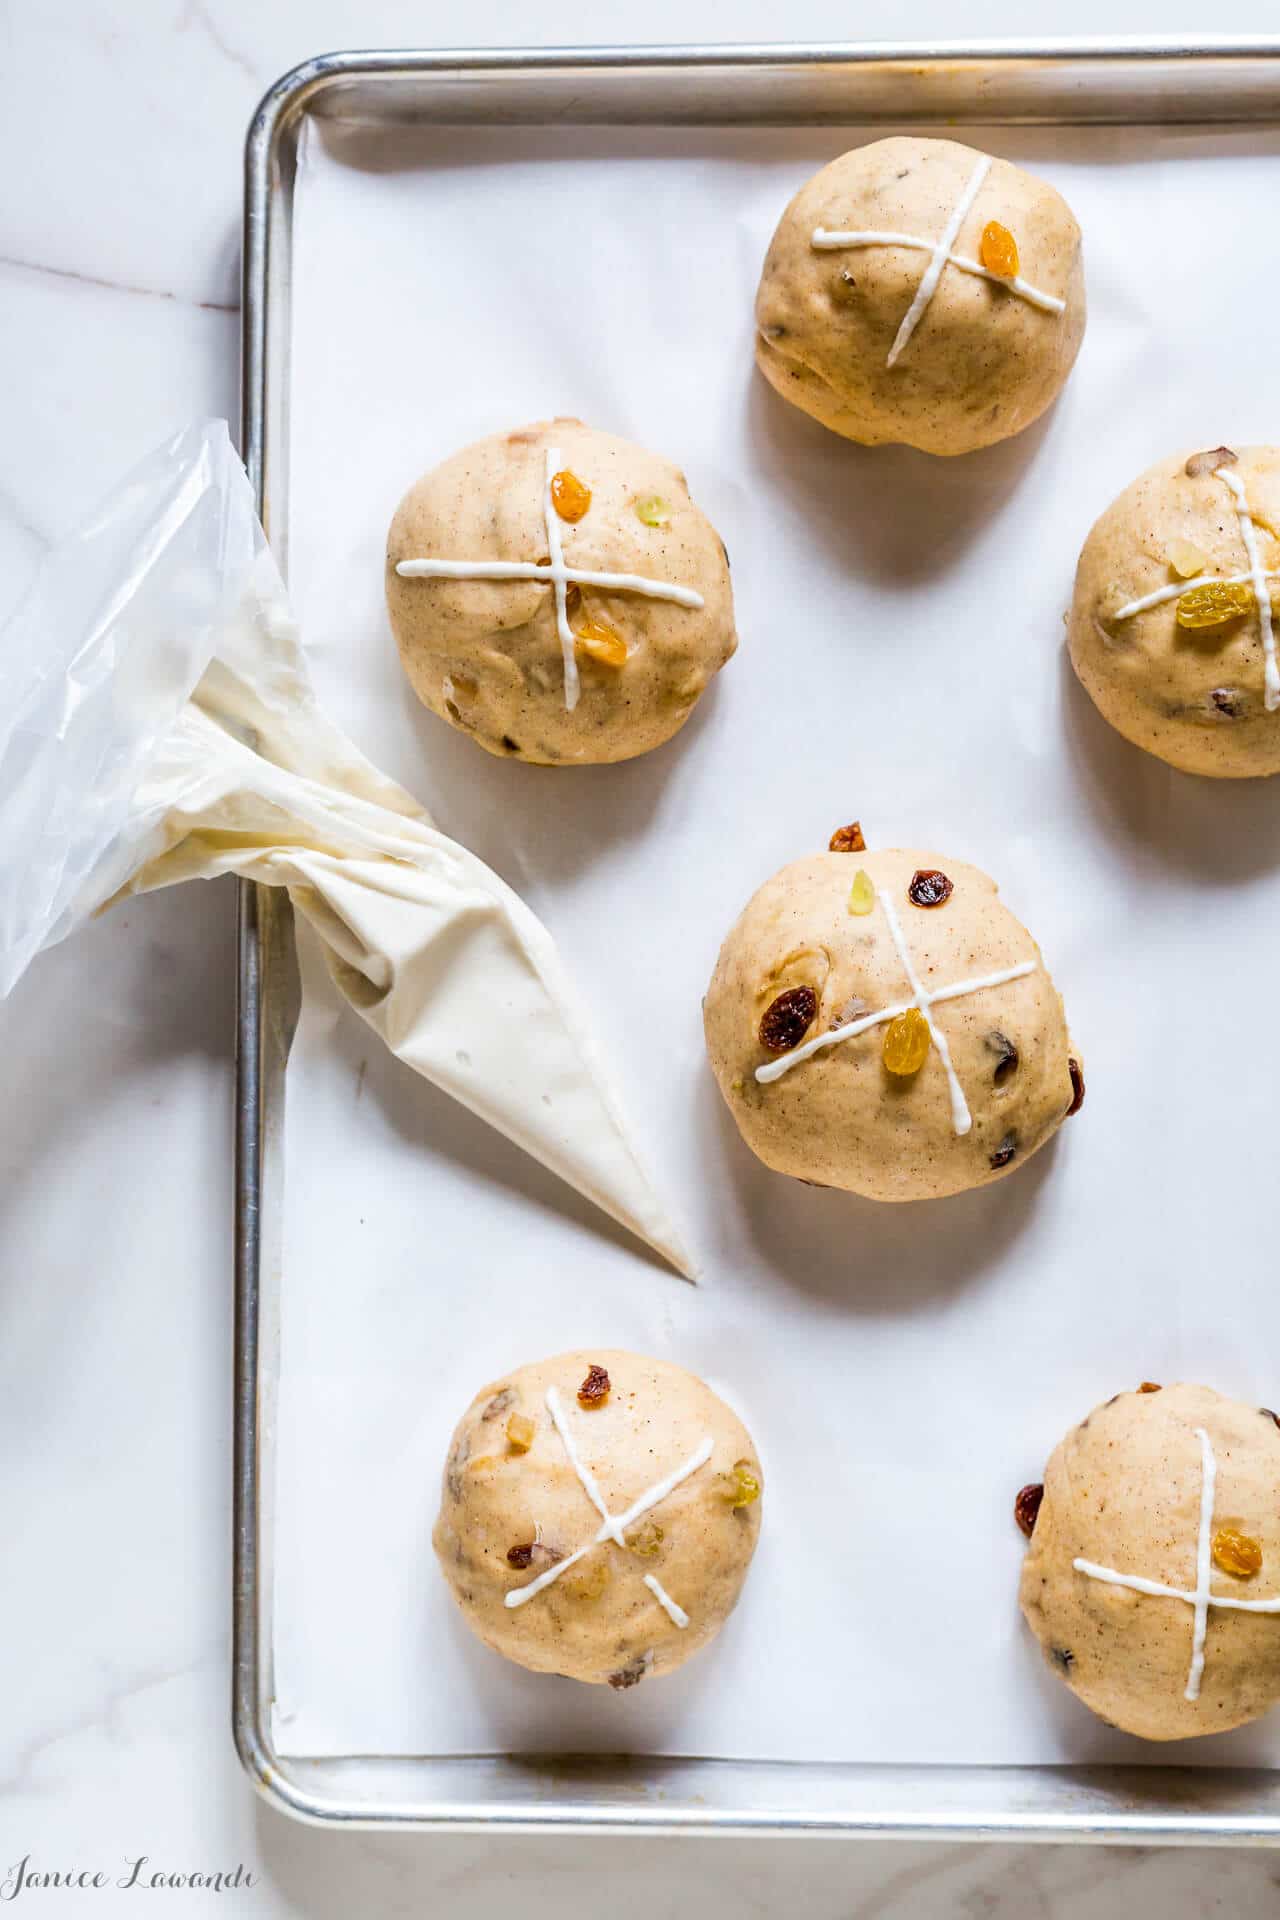 Piping flour paste onto hot cross buns with a piping bag after rising but before baking